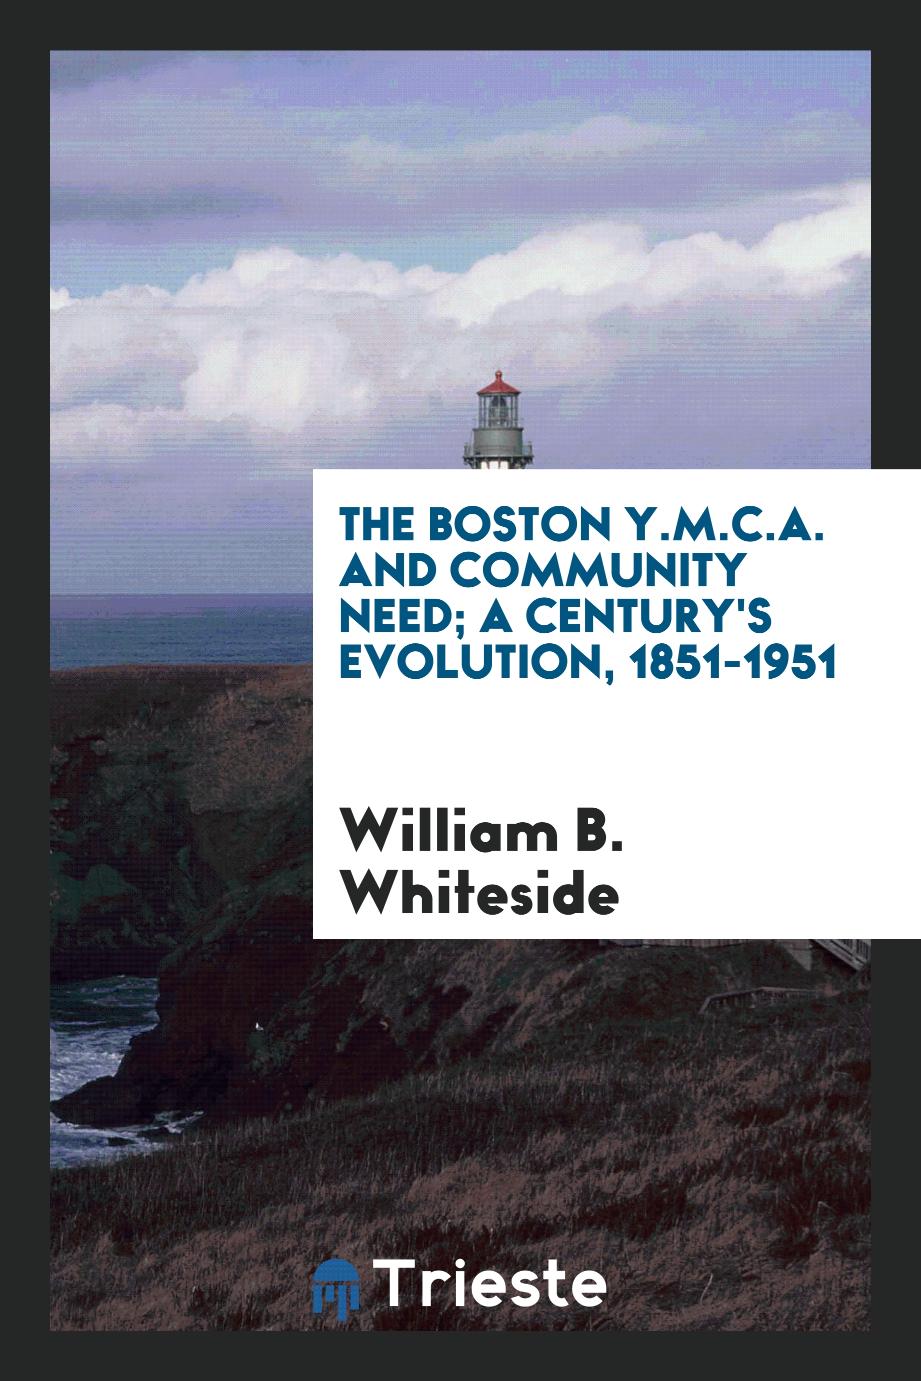 The Boston Y.M.C.A. and community need; a century's evolution, 1851-1951